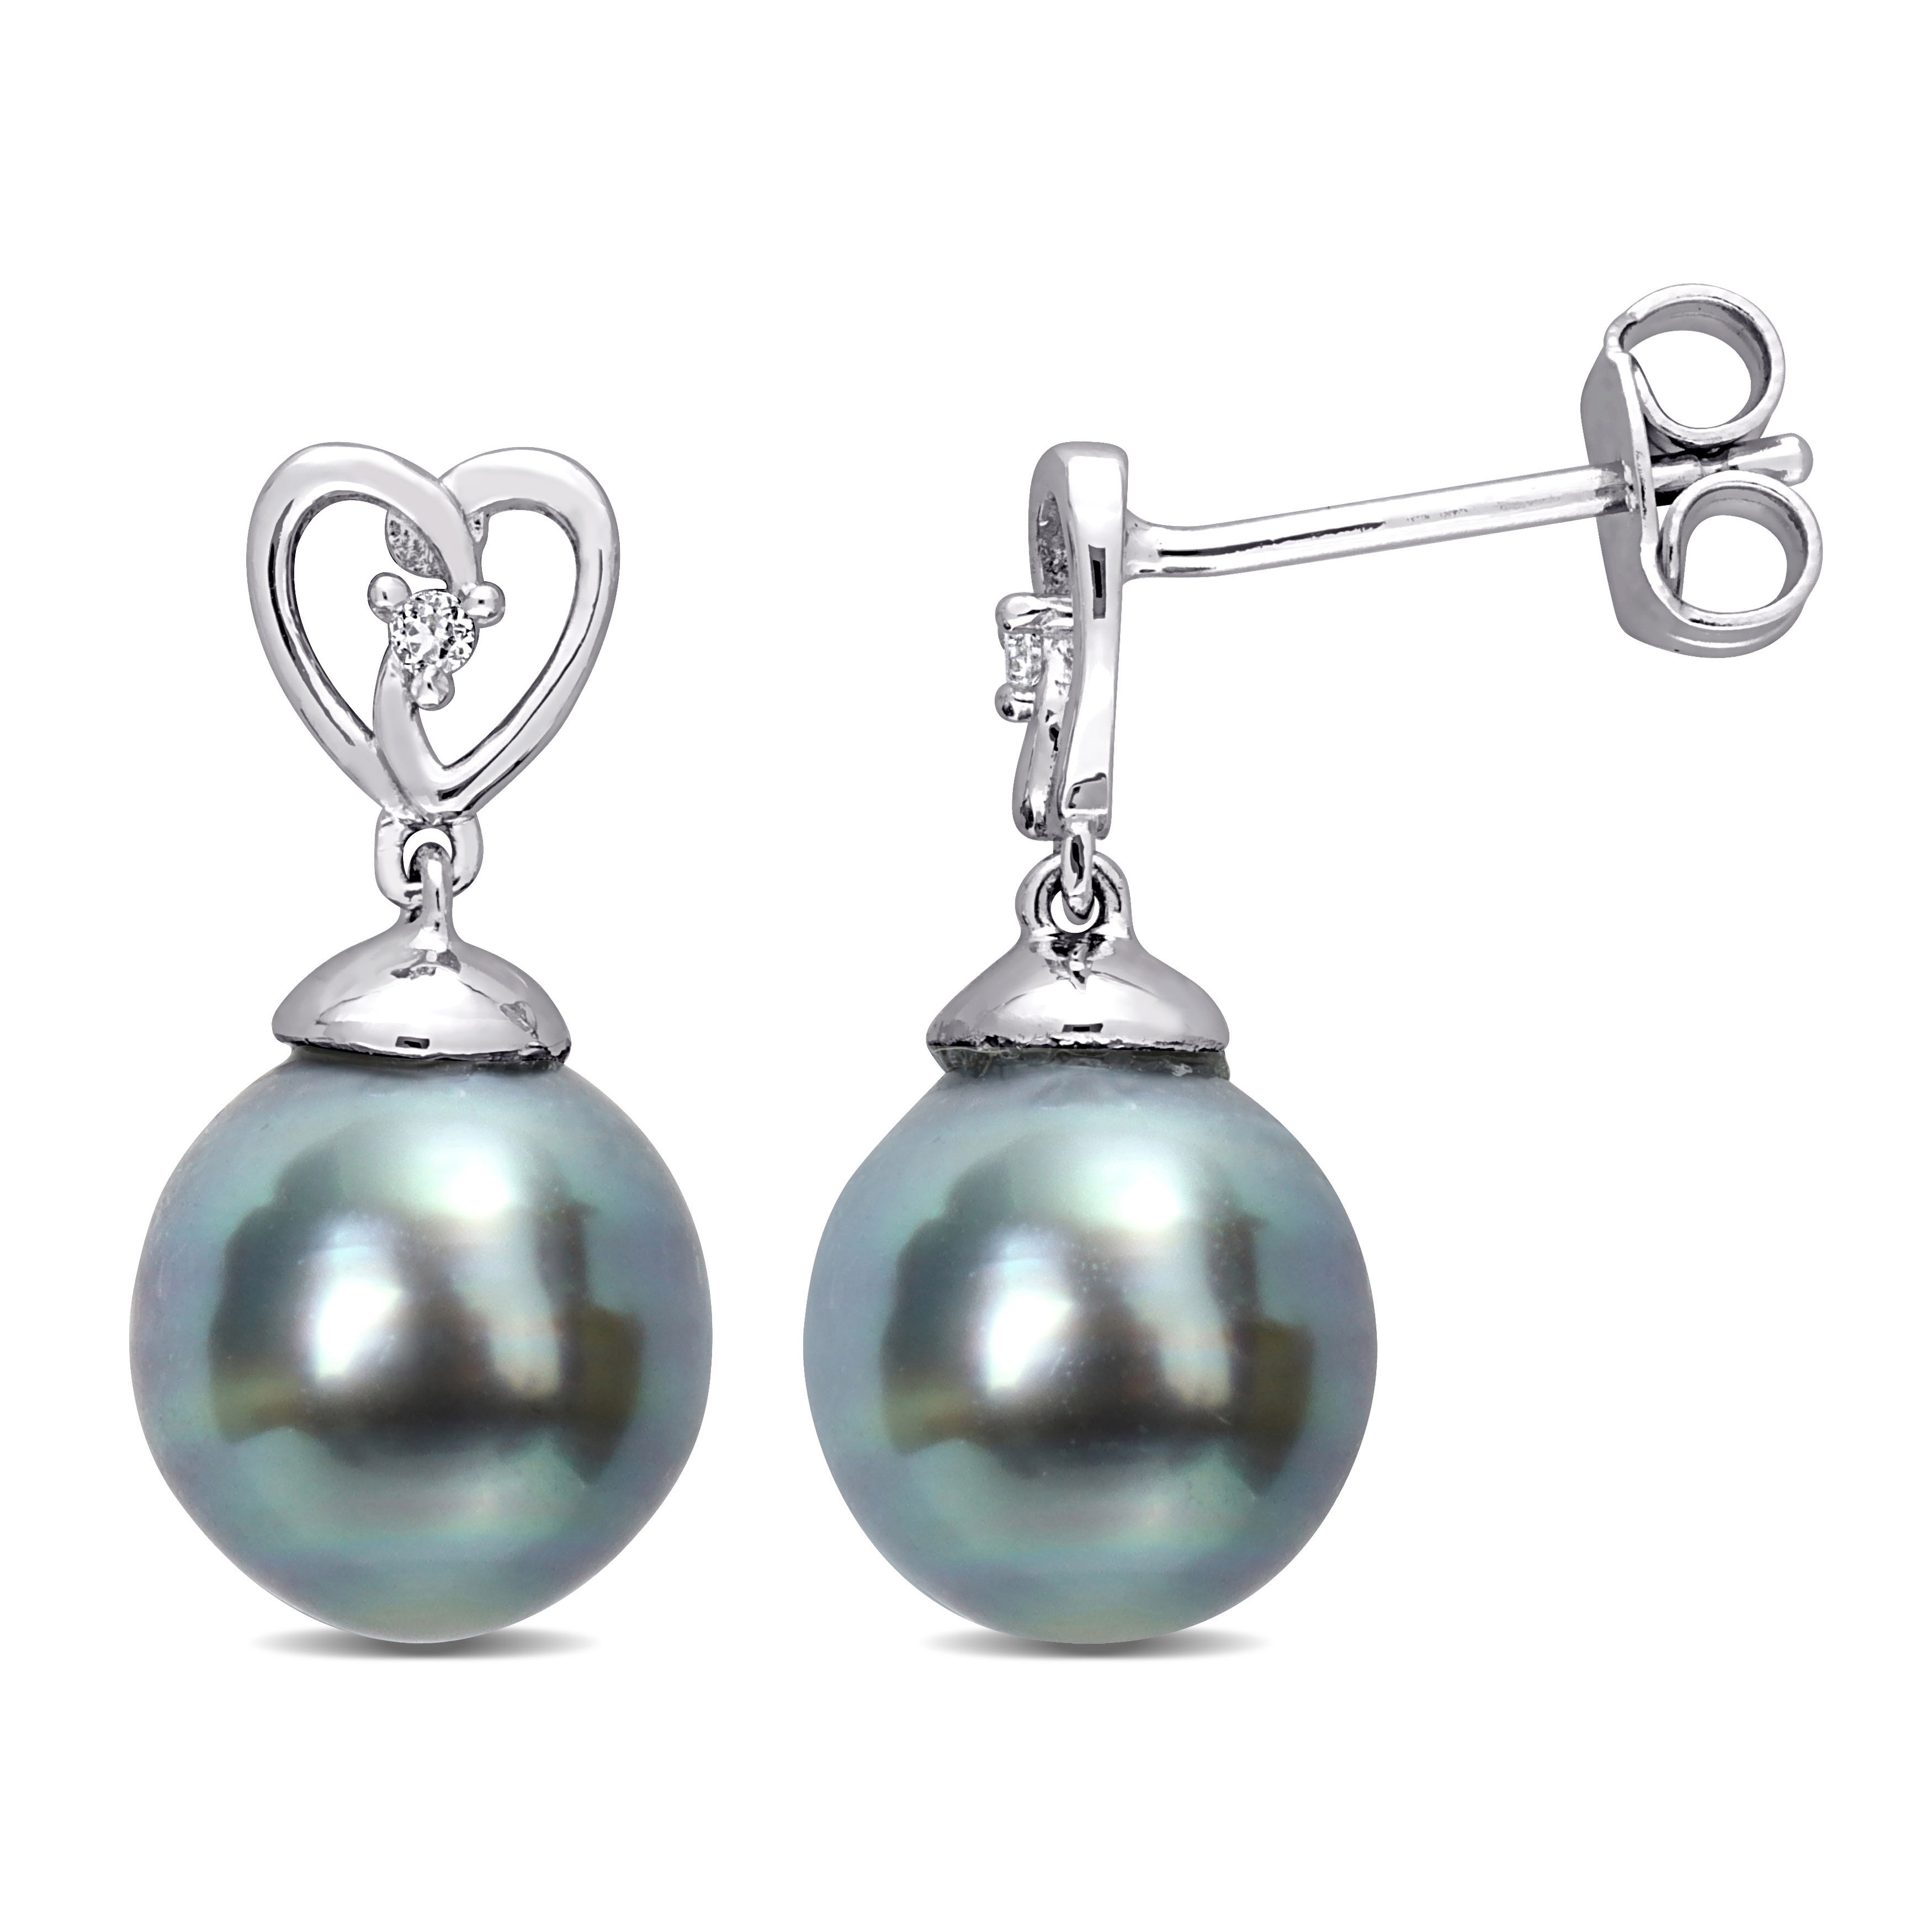 8-9 MM Black Tahitian Cultured Pearl and White Topaz Drop Earrings in Sterling Silver